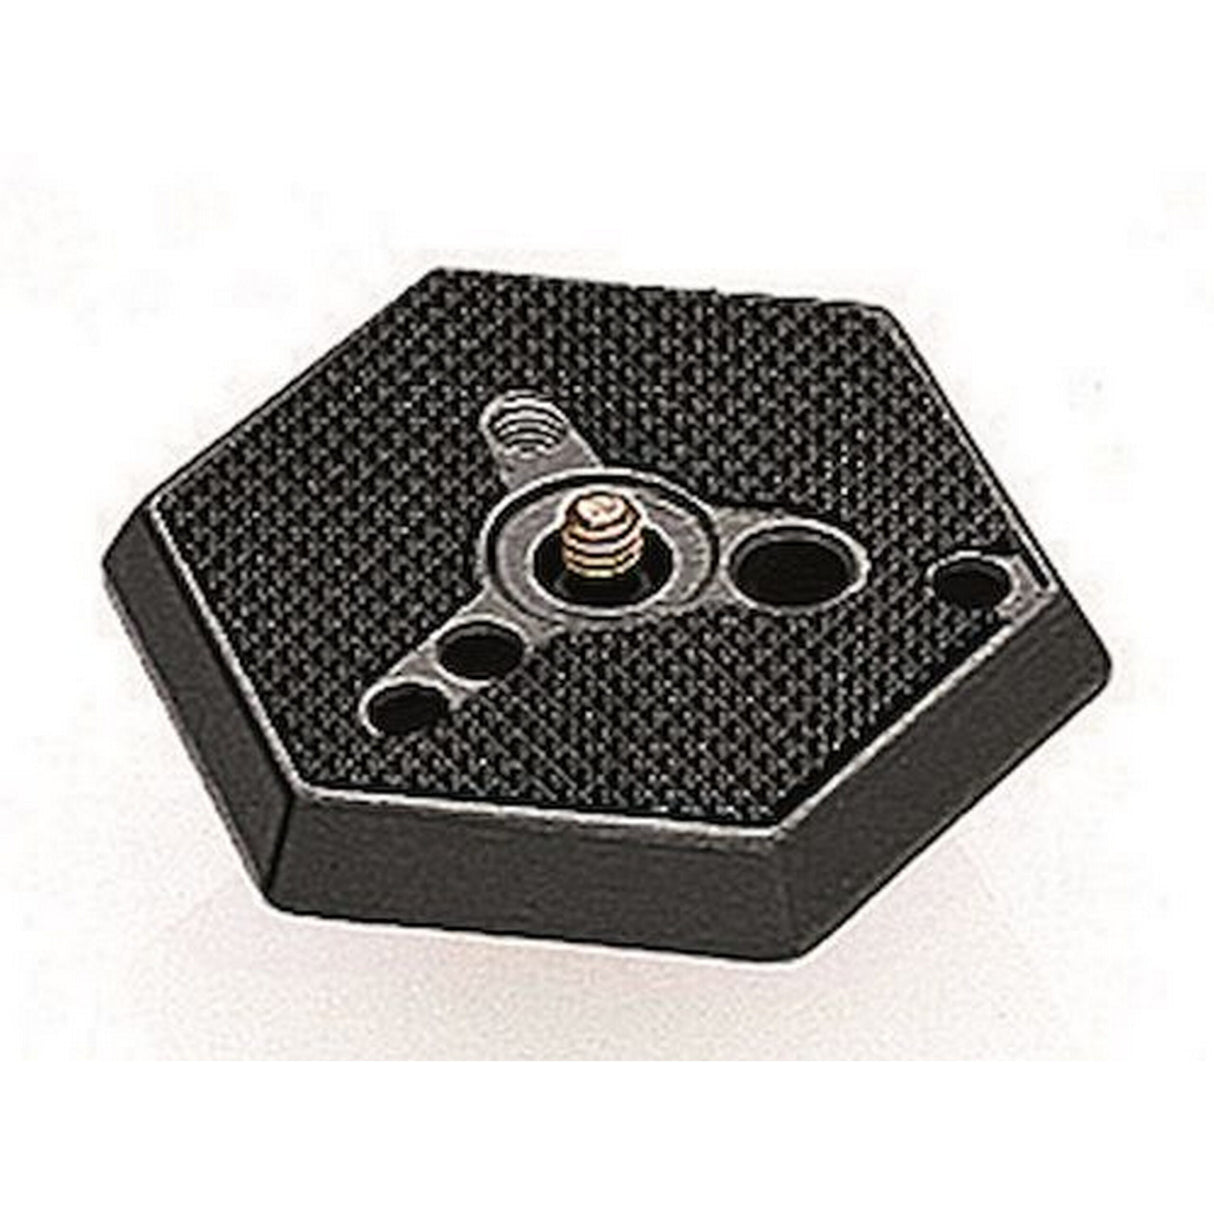 Manfrotto 030-14 Hexagonal Replacement Quick Release Plate 1/4-20